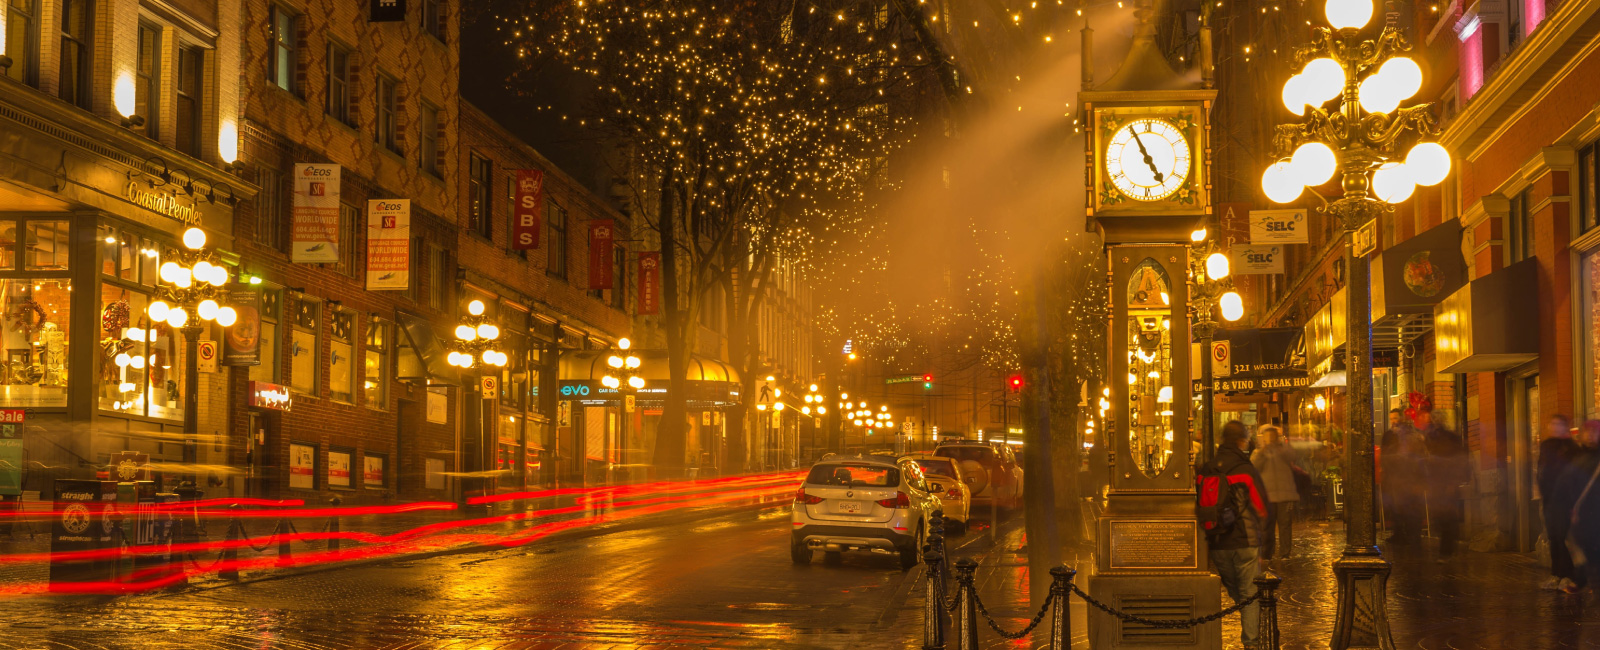 Steam Clock in Gastown, Vancouver at night